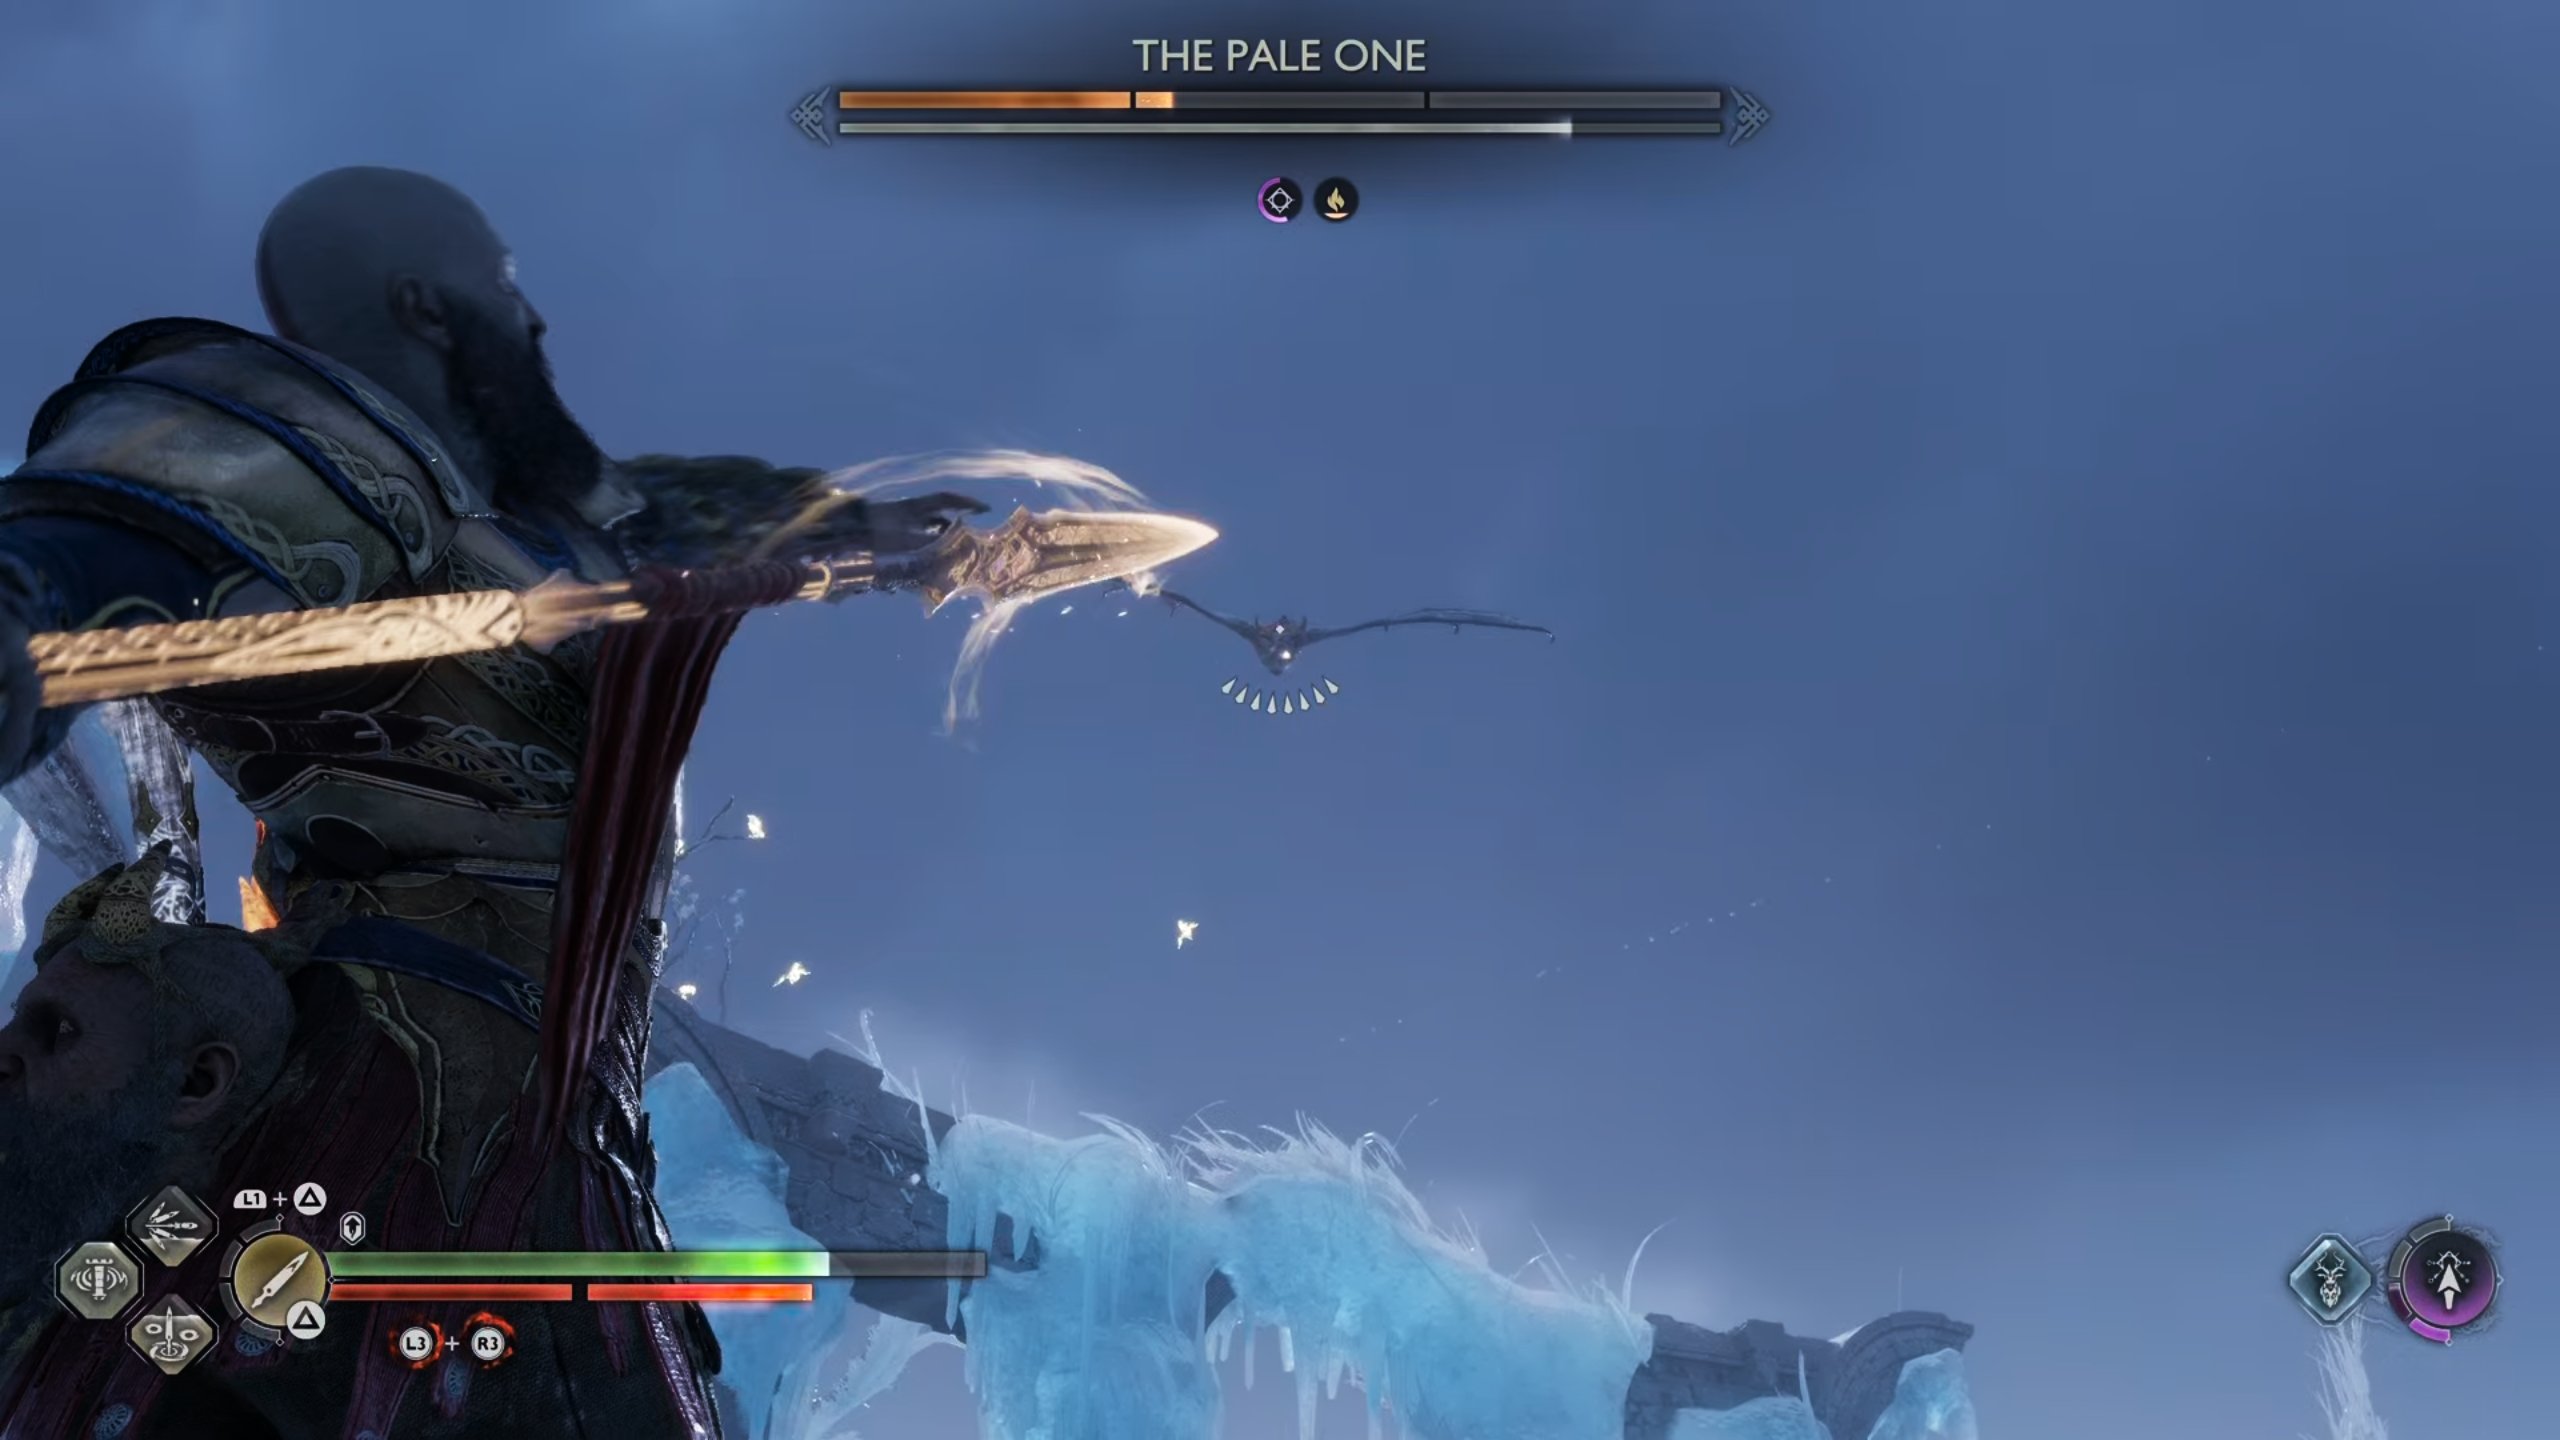 Use the Draupnir Spear to knock the dragon out of the sky.